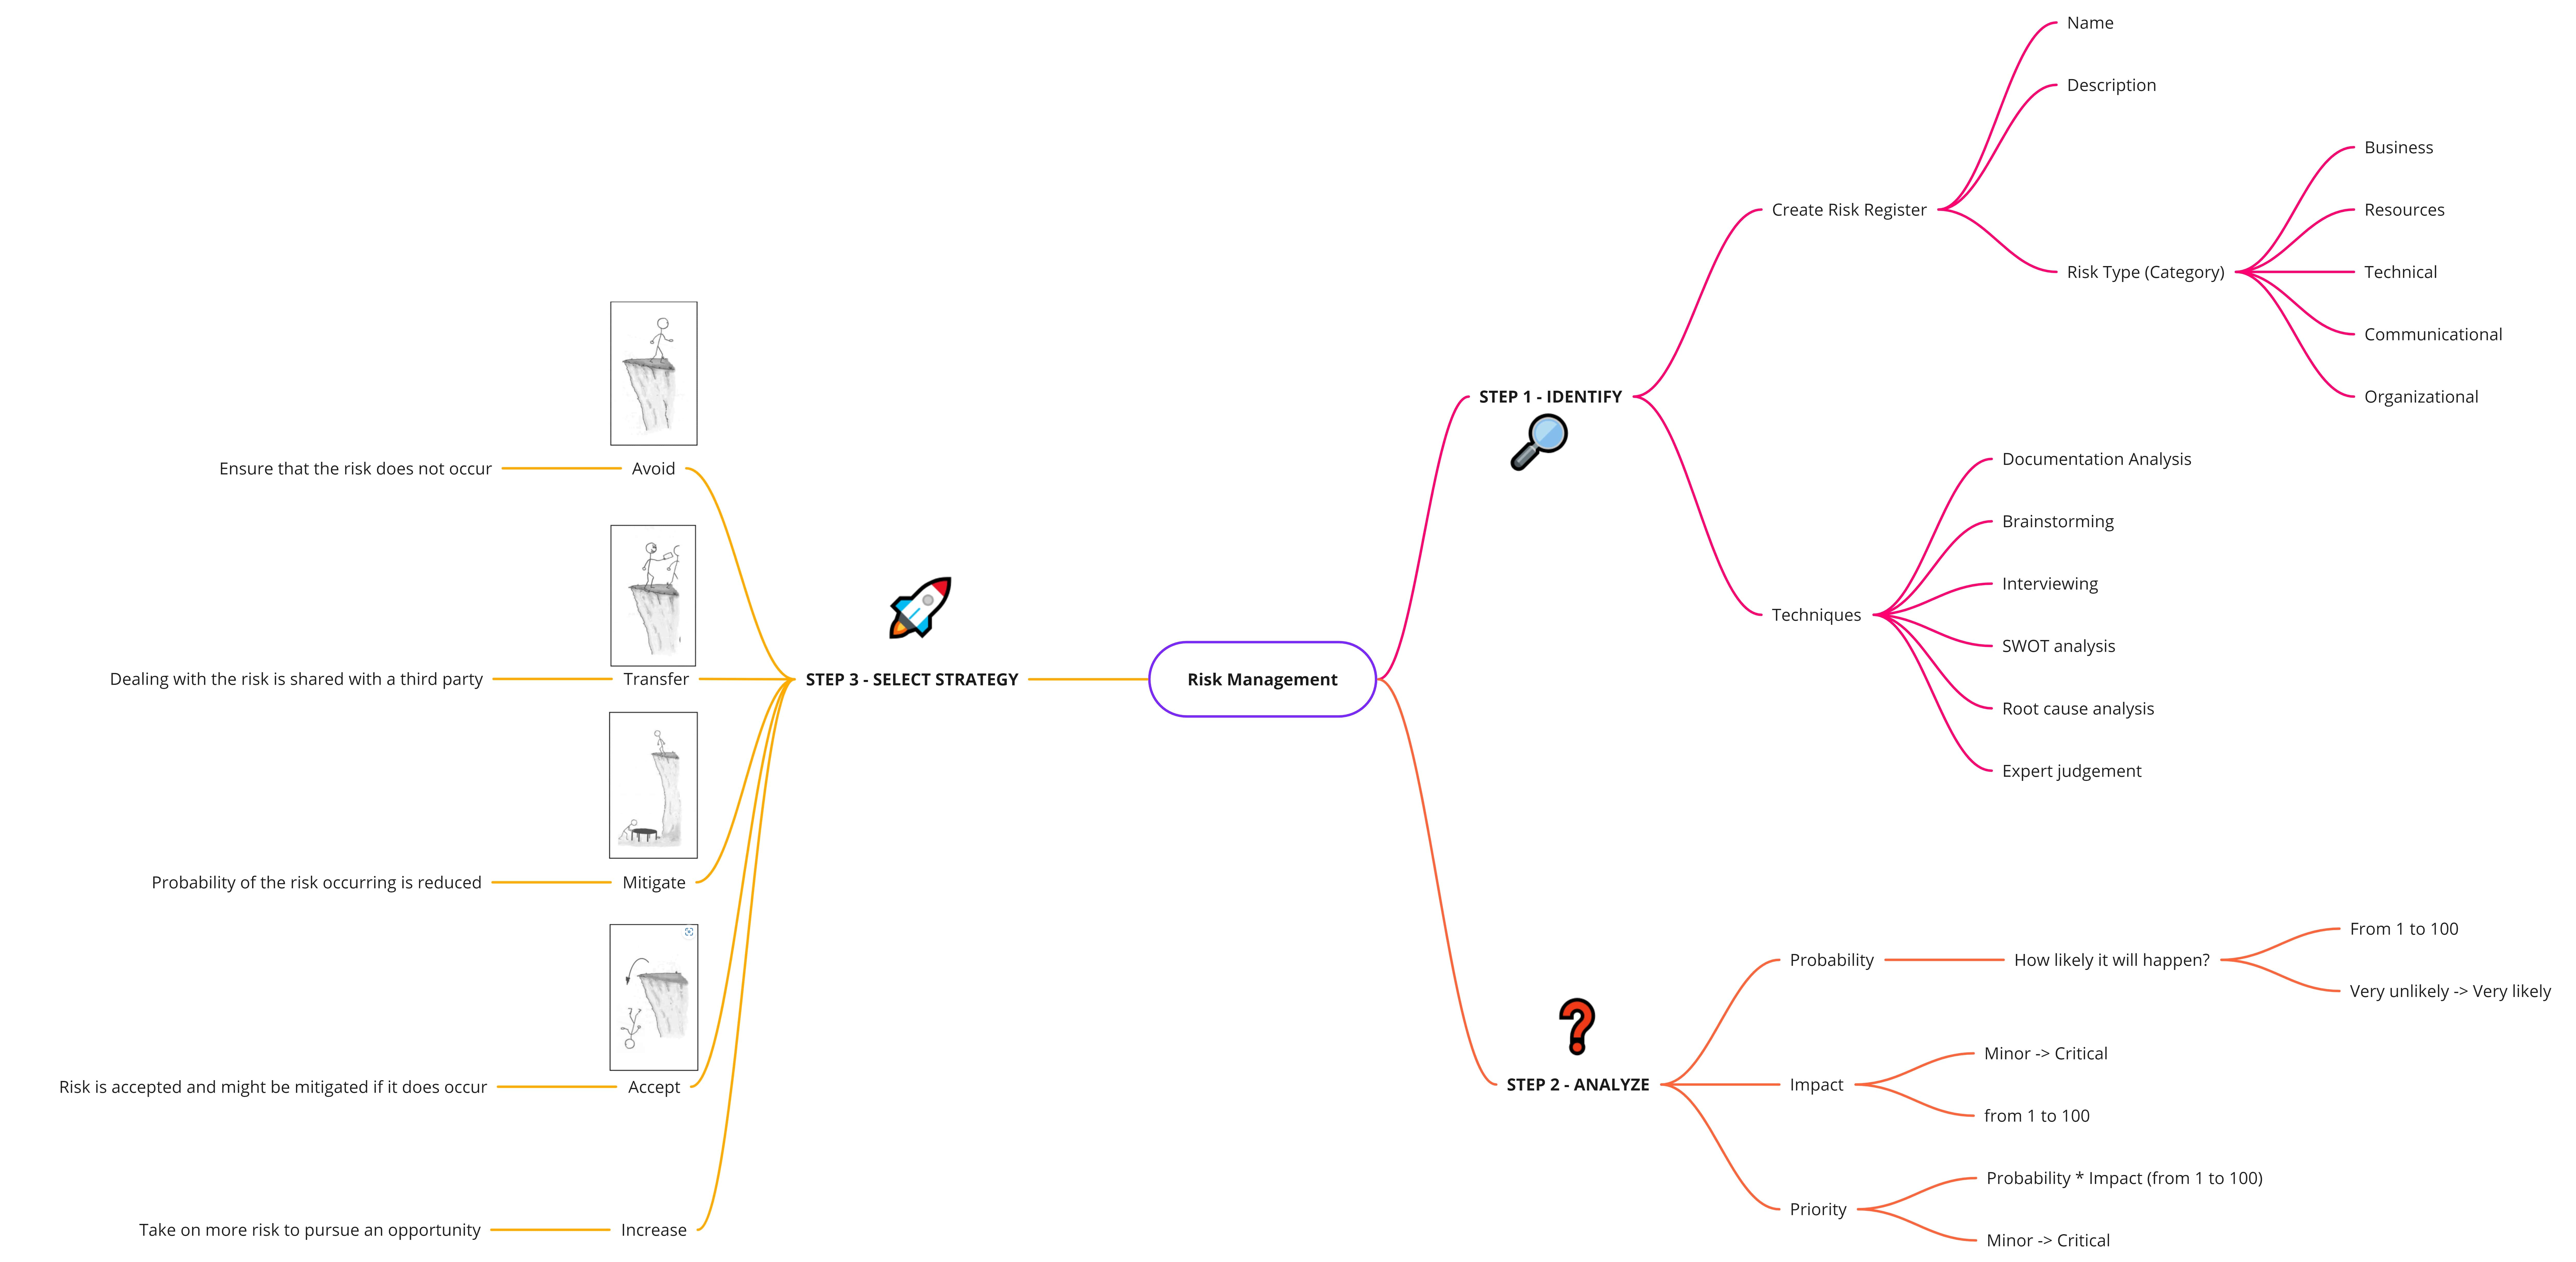 Mind map on the topic of risk management